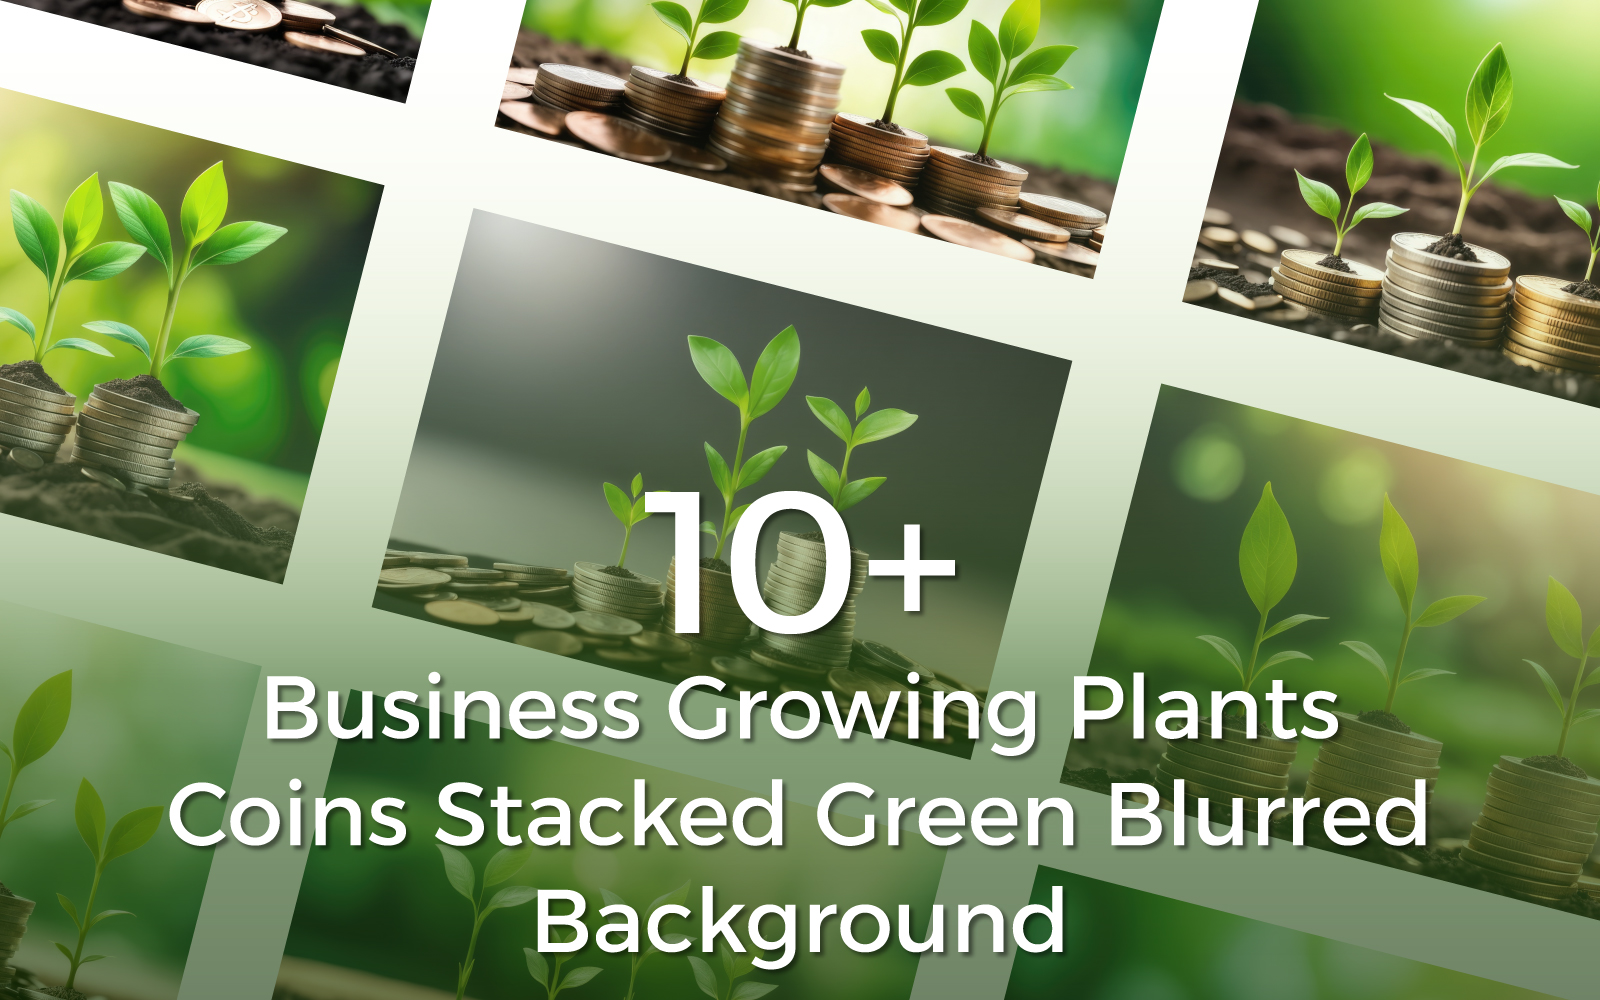 10+ Premium Business Growing Plants on Coins Stacked on Green Blurred Background Bundles